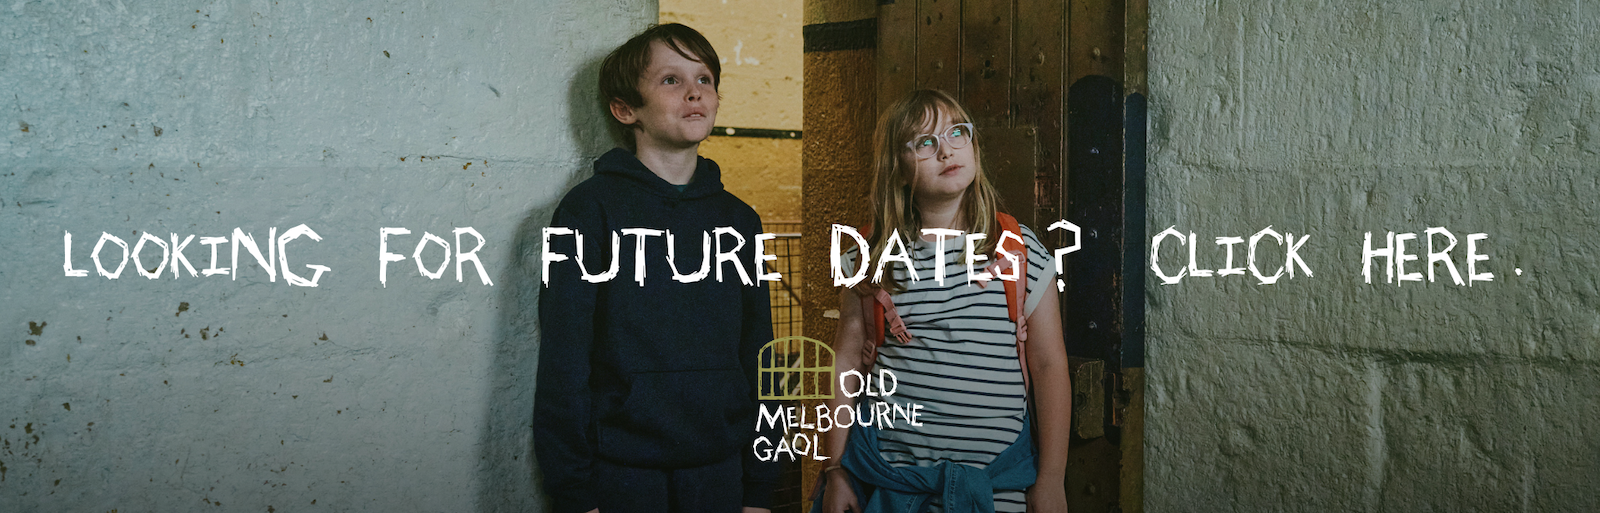 Looking for future dates? Click here.